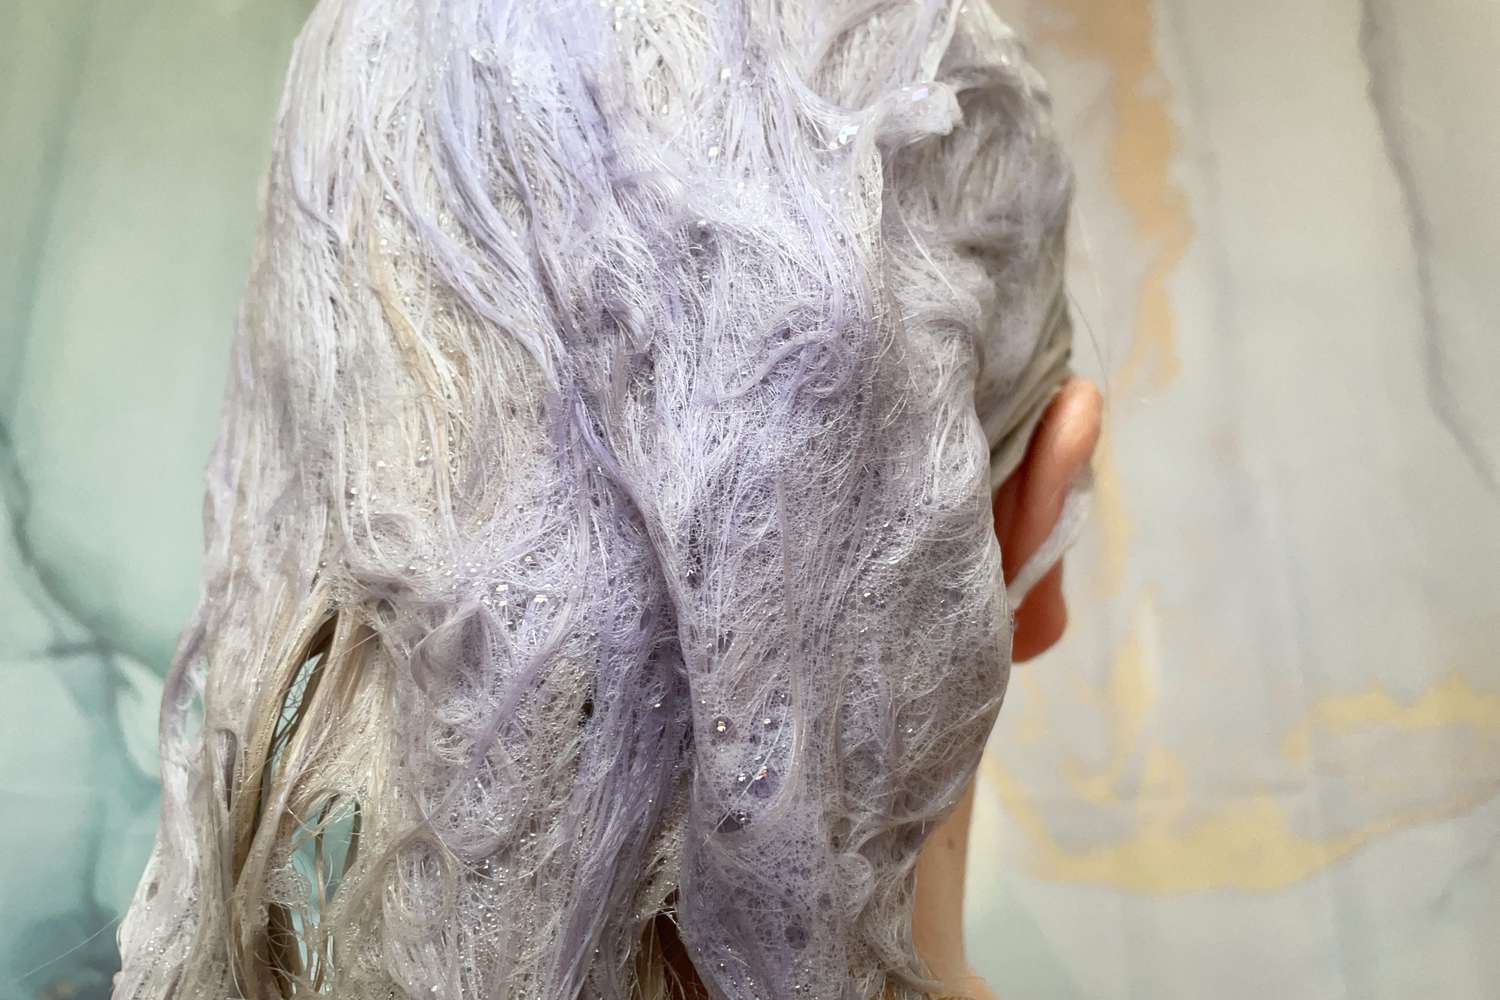 A person applies Clairol Professional Shimmer Lights Purple Shampoo